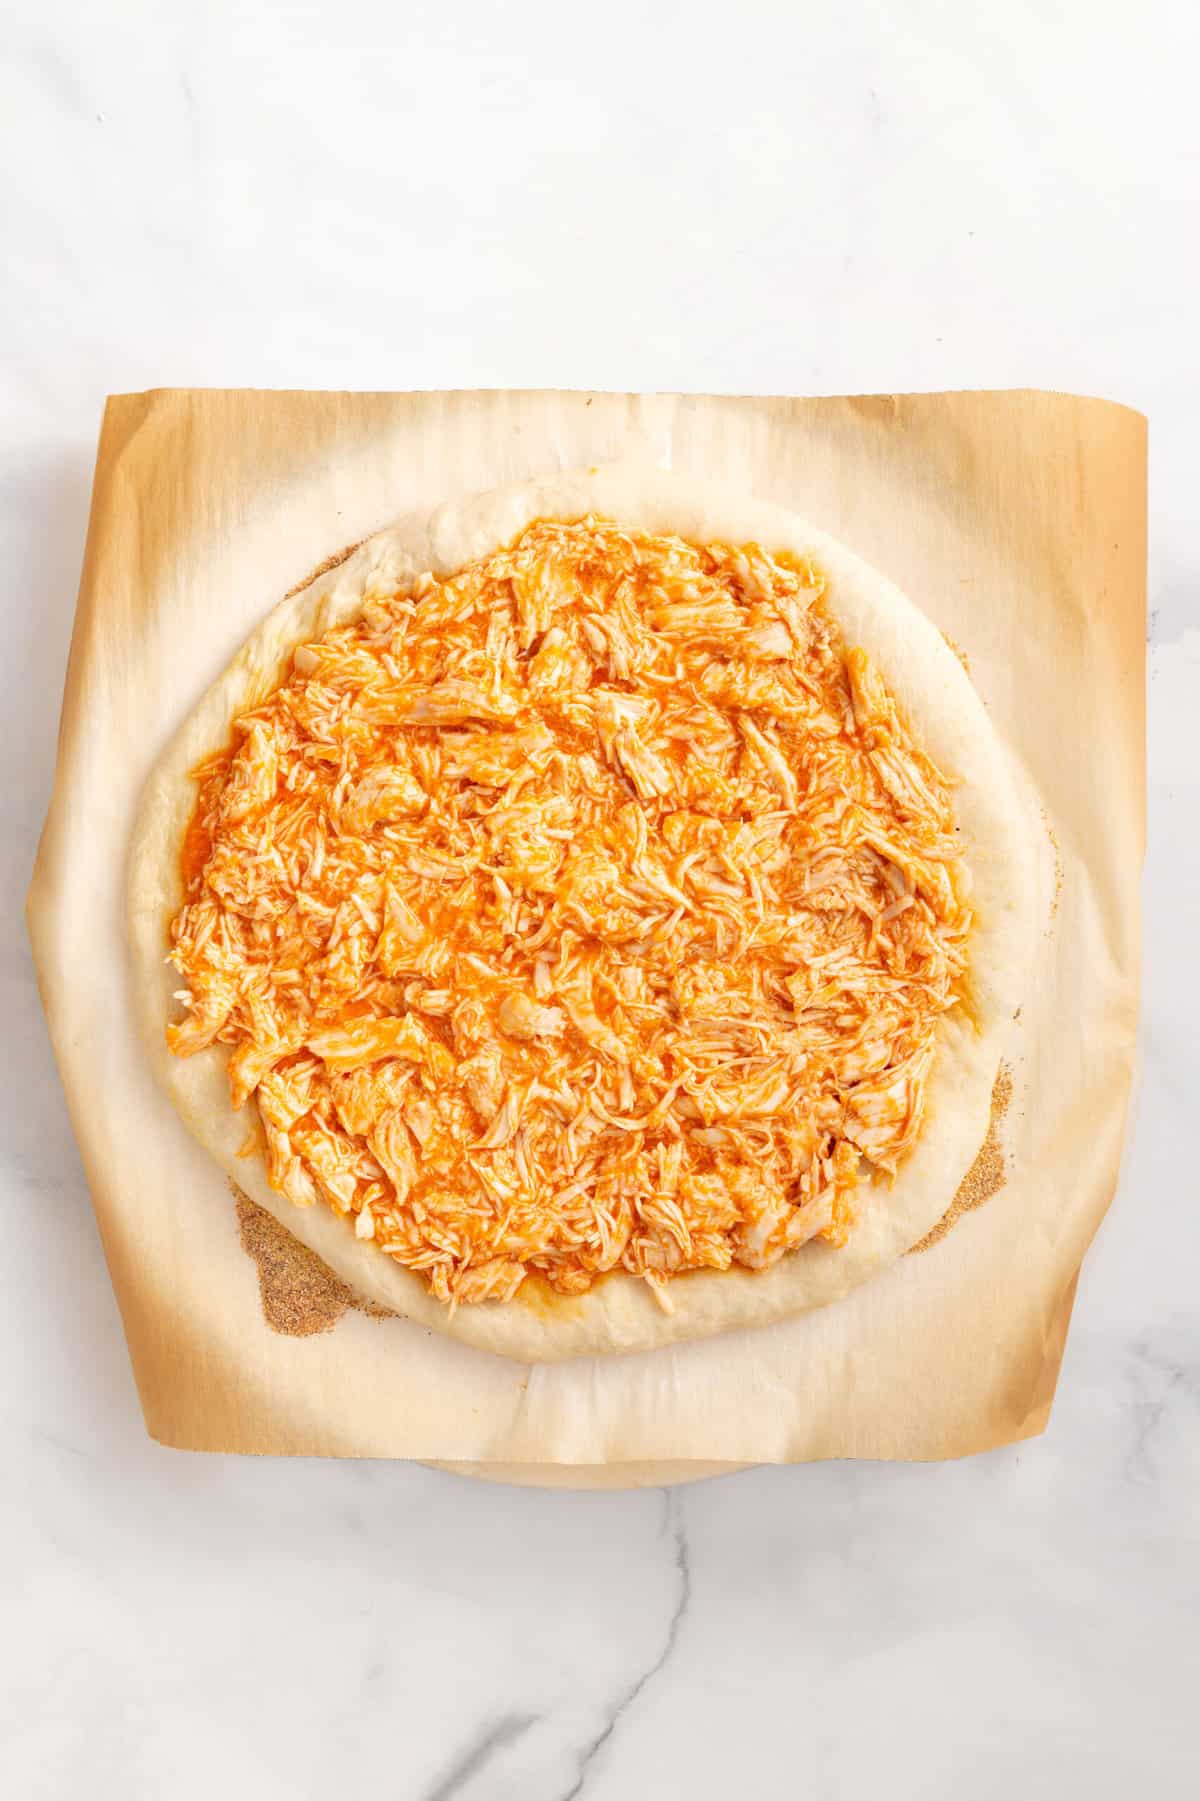 parbaked pizza crust with buffalo chicken mixture on top